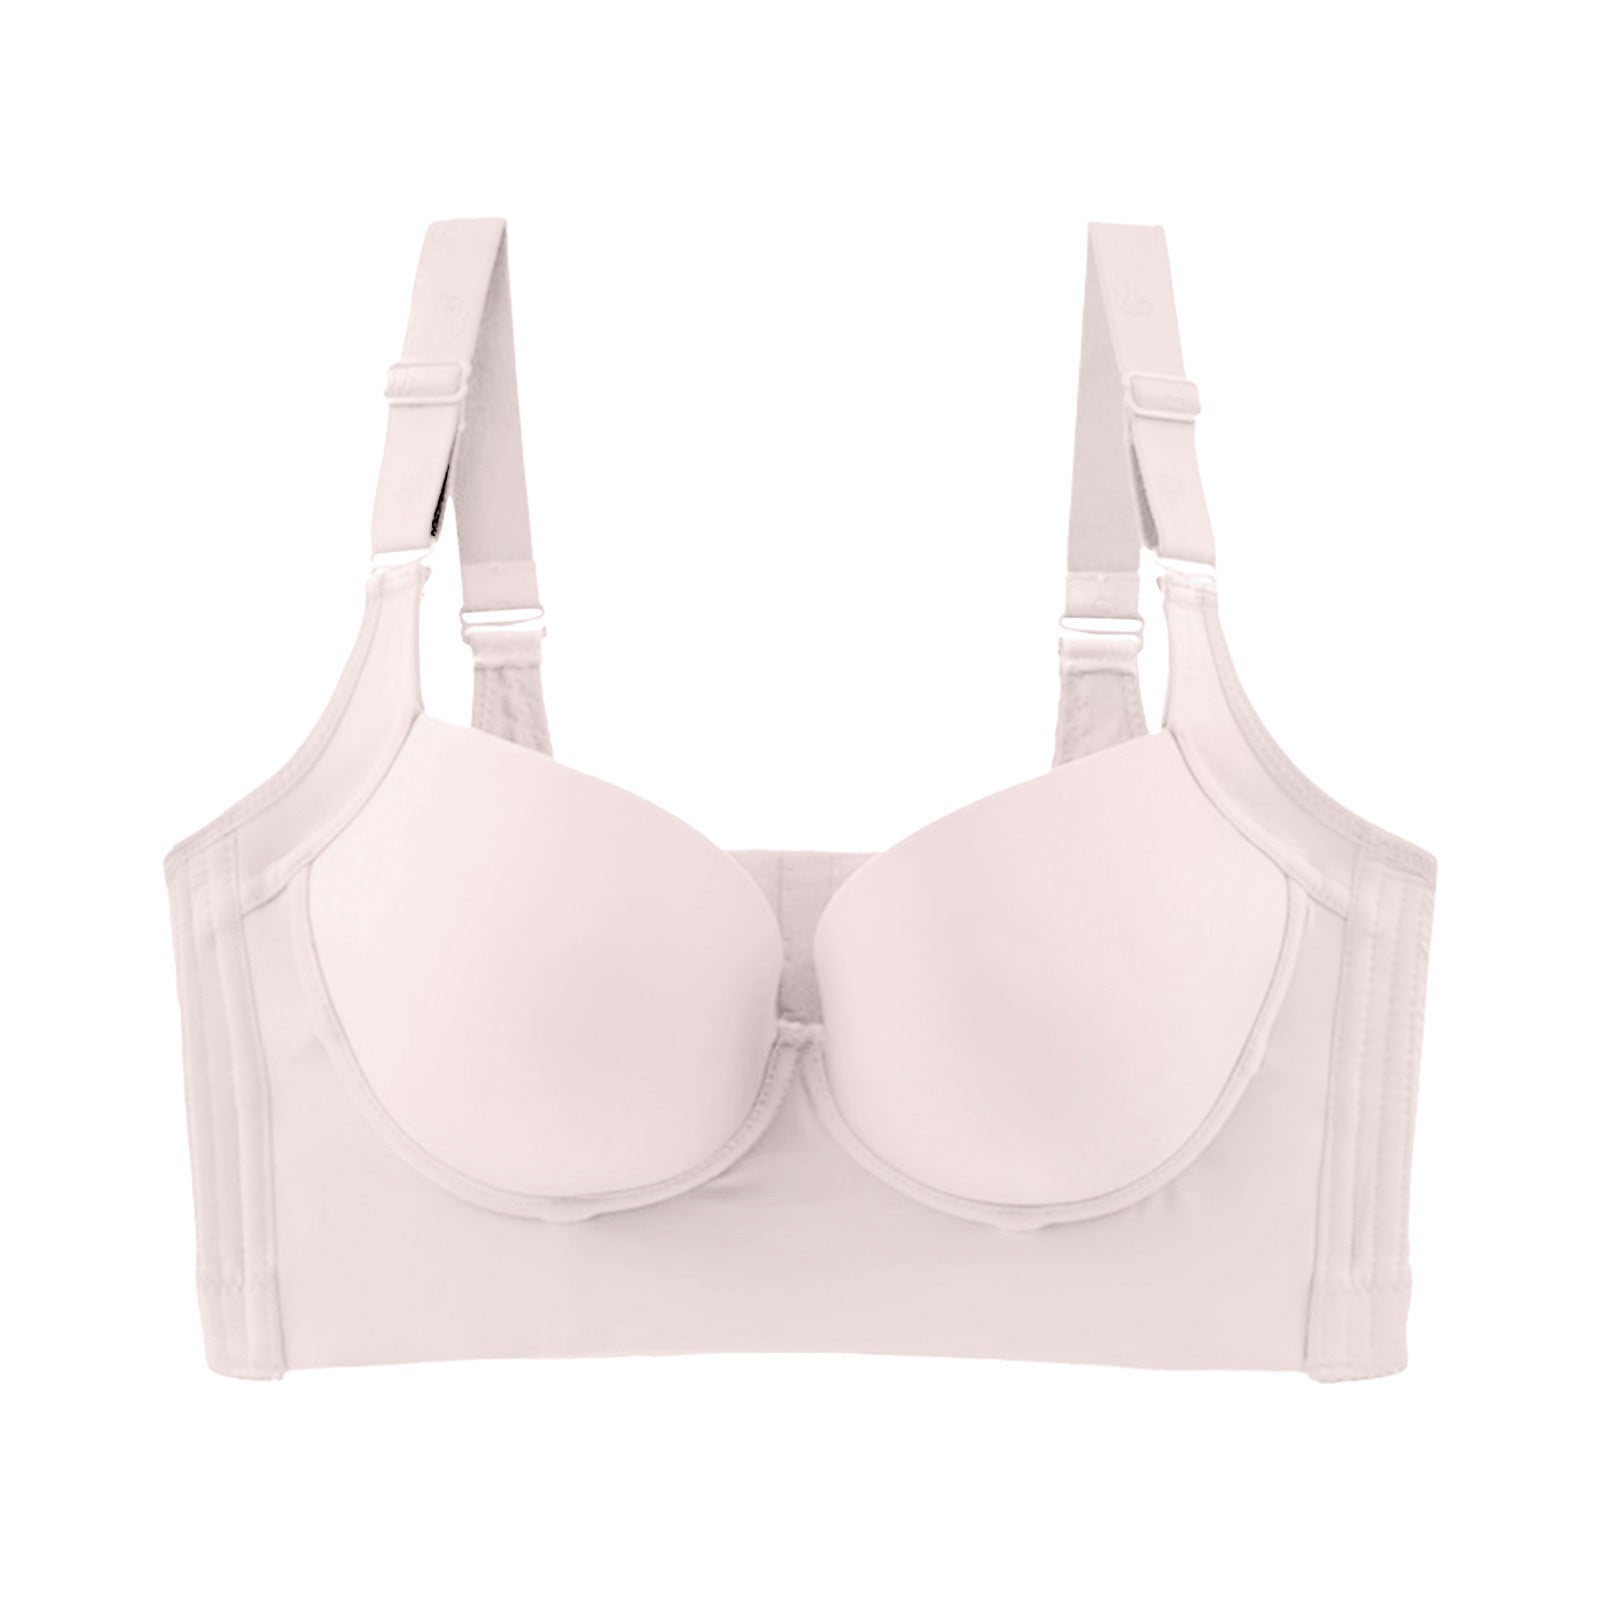 Viadha underoutfit bras for women Ladies Fashion Comfortable Breathable No  Steel Ring Seven-breasted Lift Breasts Bra Underwear